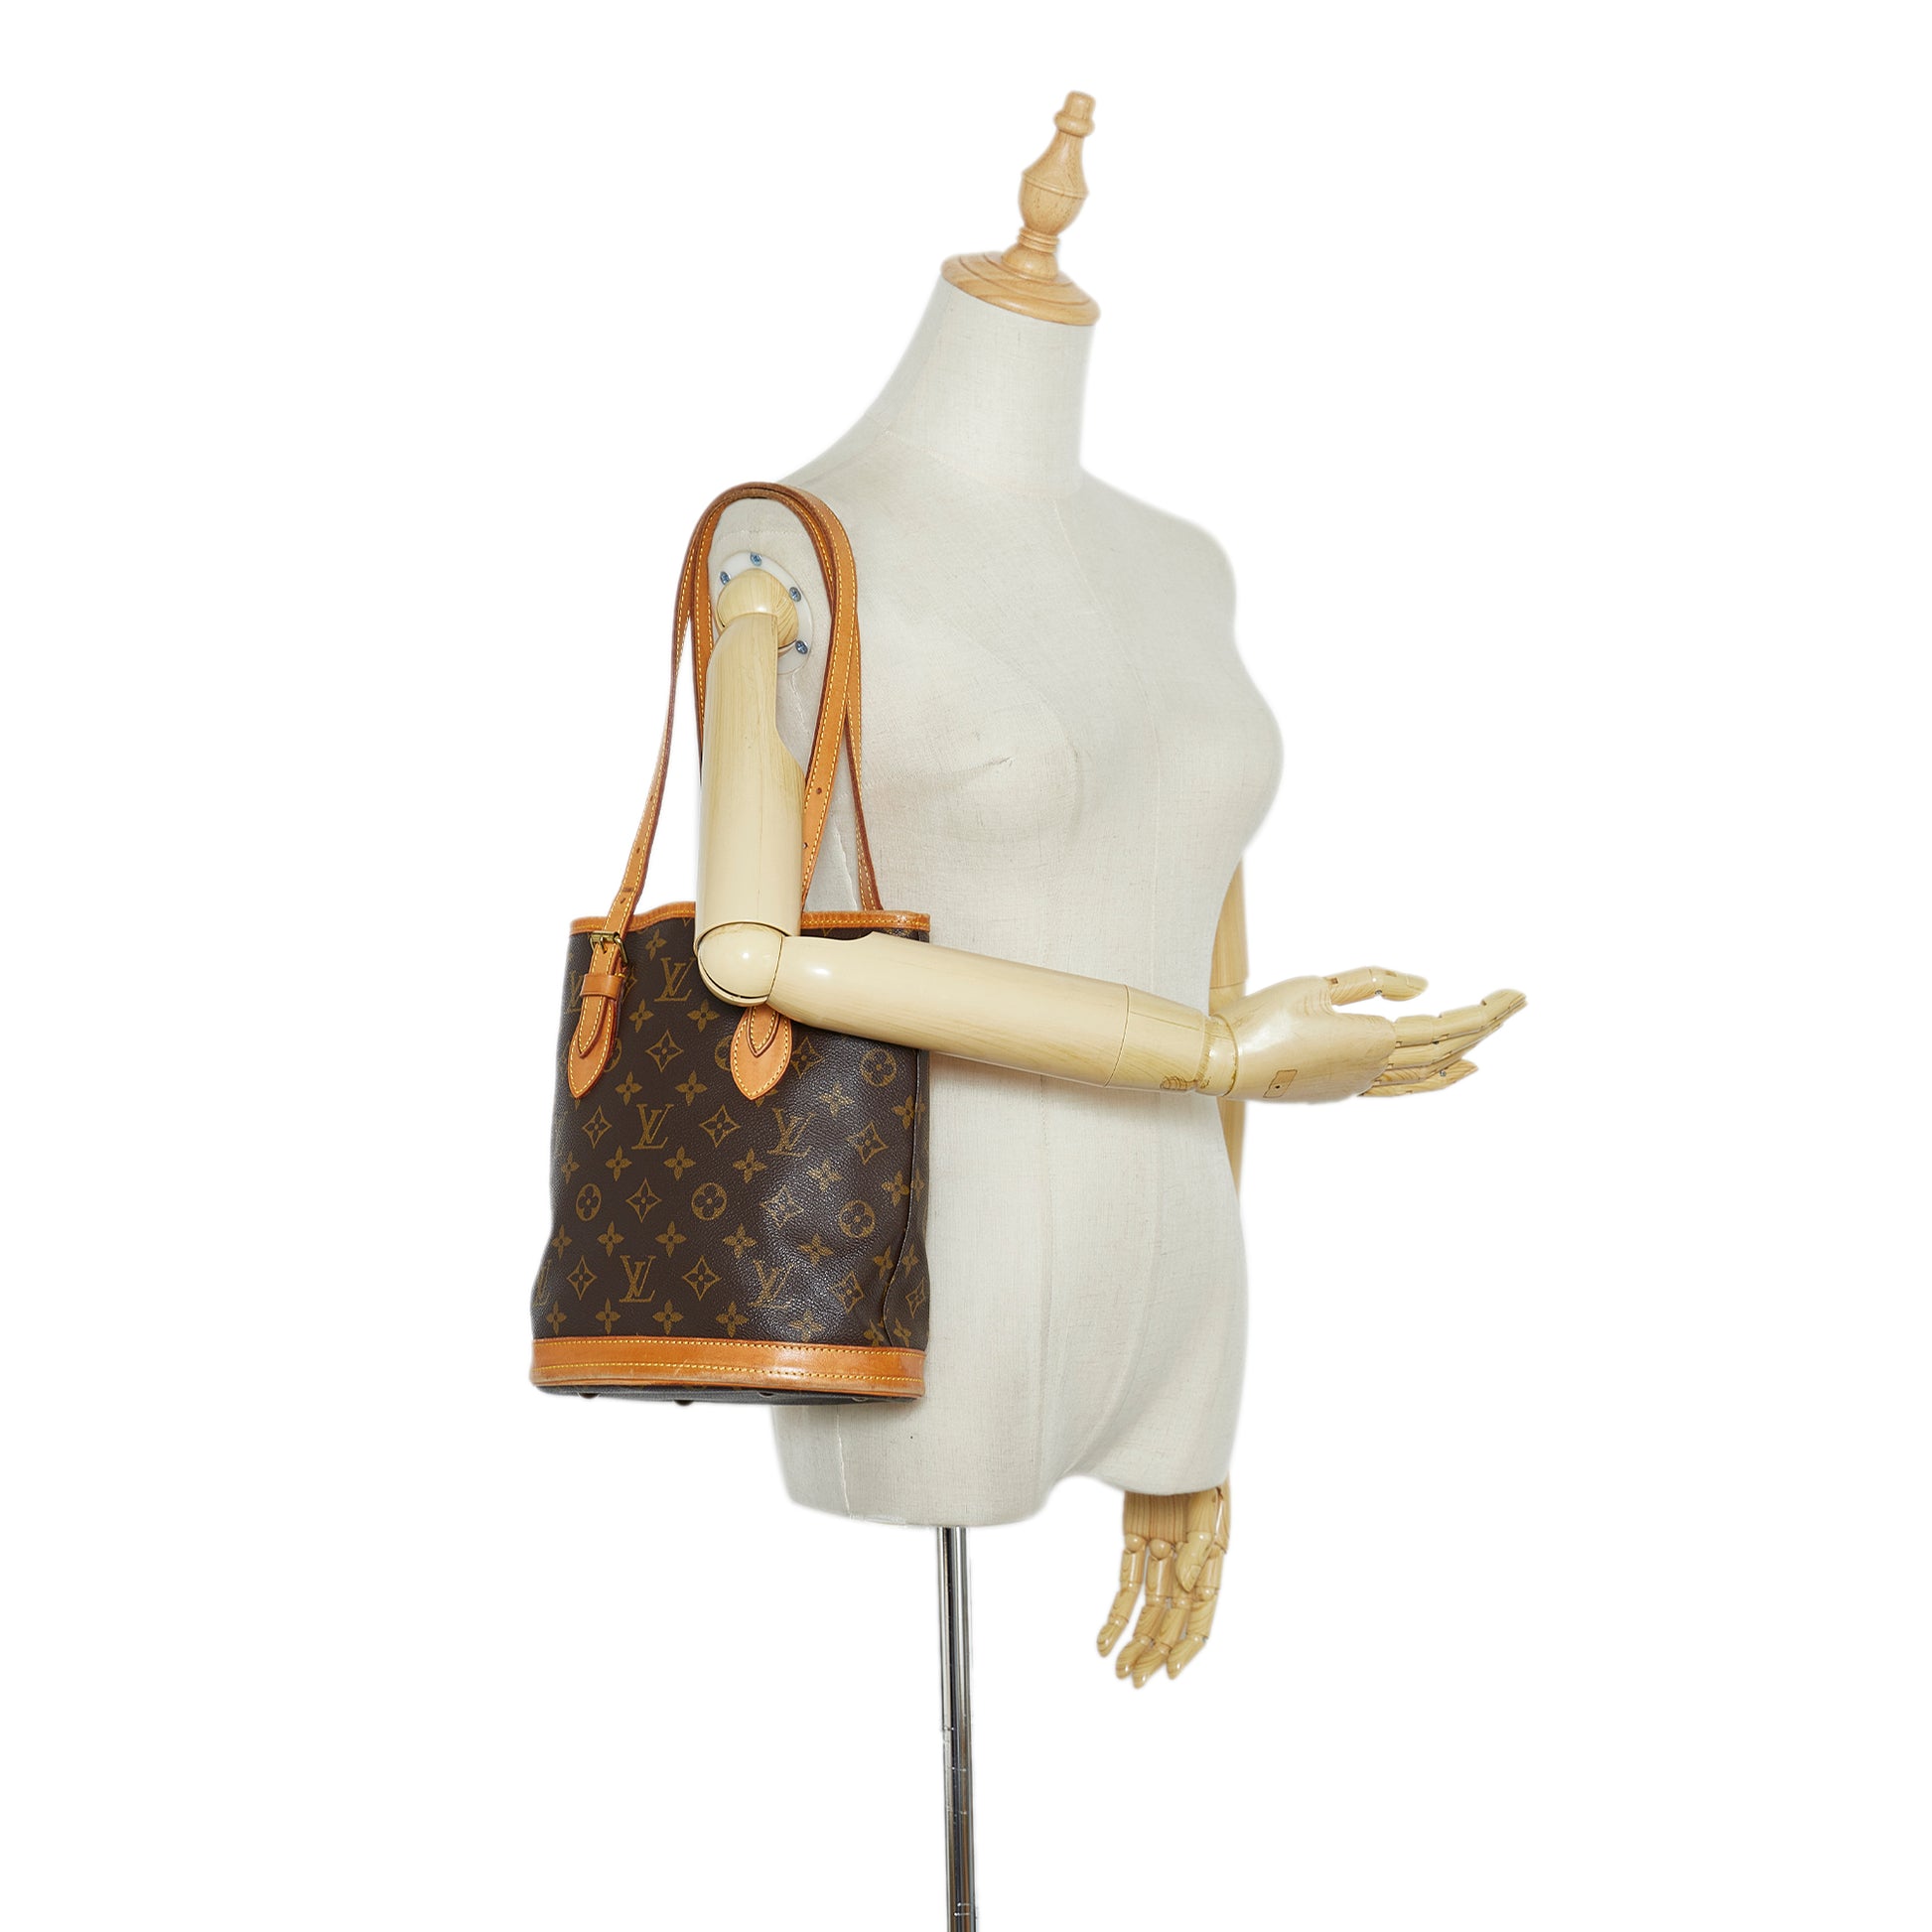 Shop for Louis Vuitton Monogram Canvas Leather Petit Bucket PM Bag -  Shipped from USA